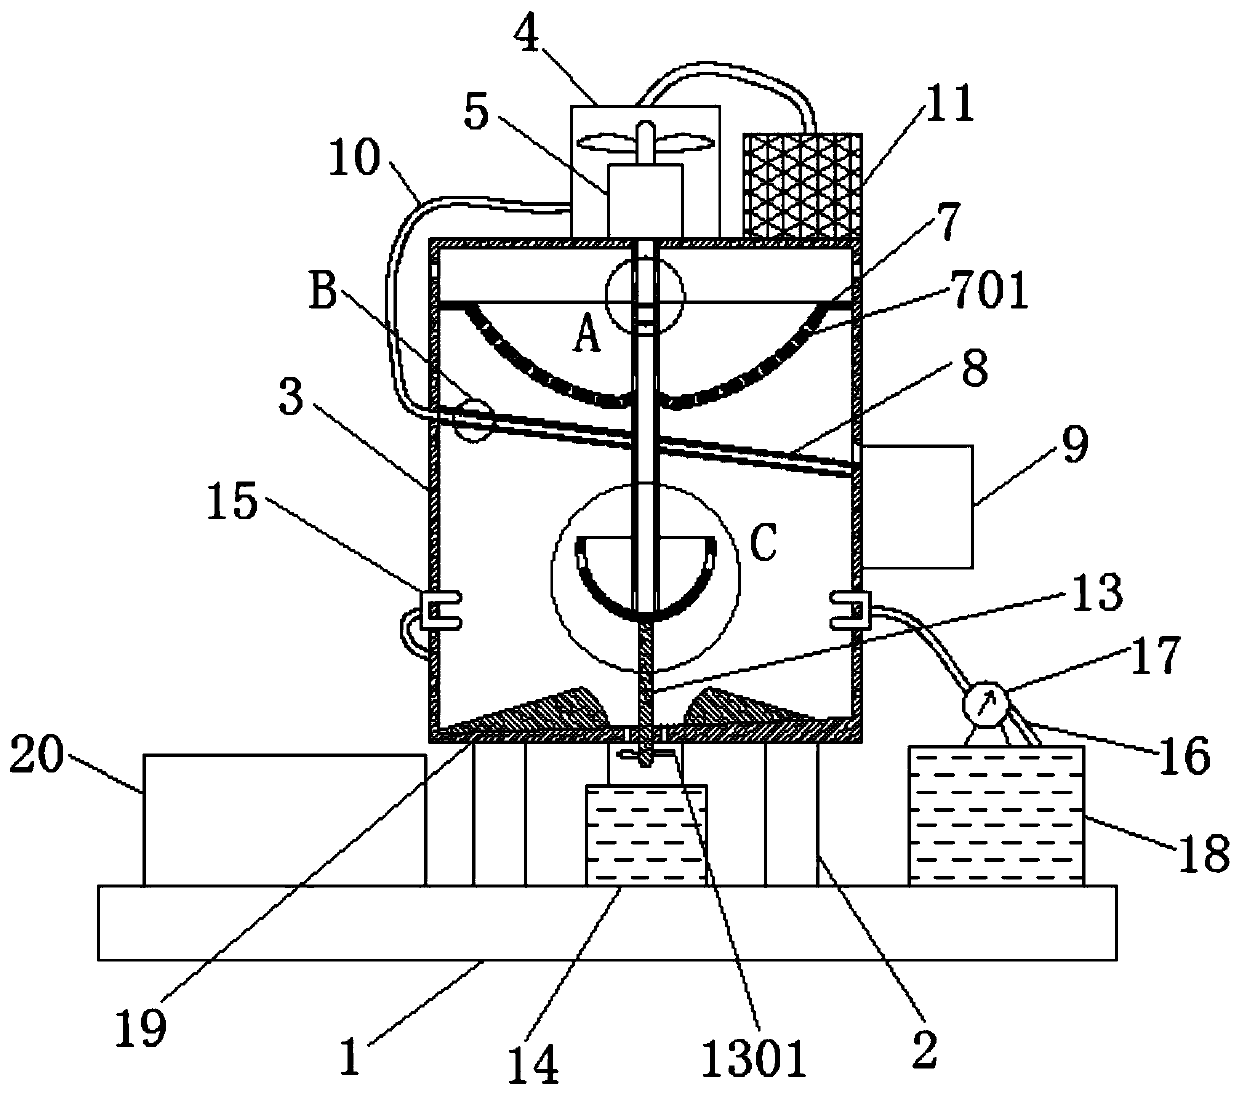 Screening and spraying device for feed processing based on Bernoulli principle